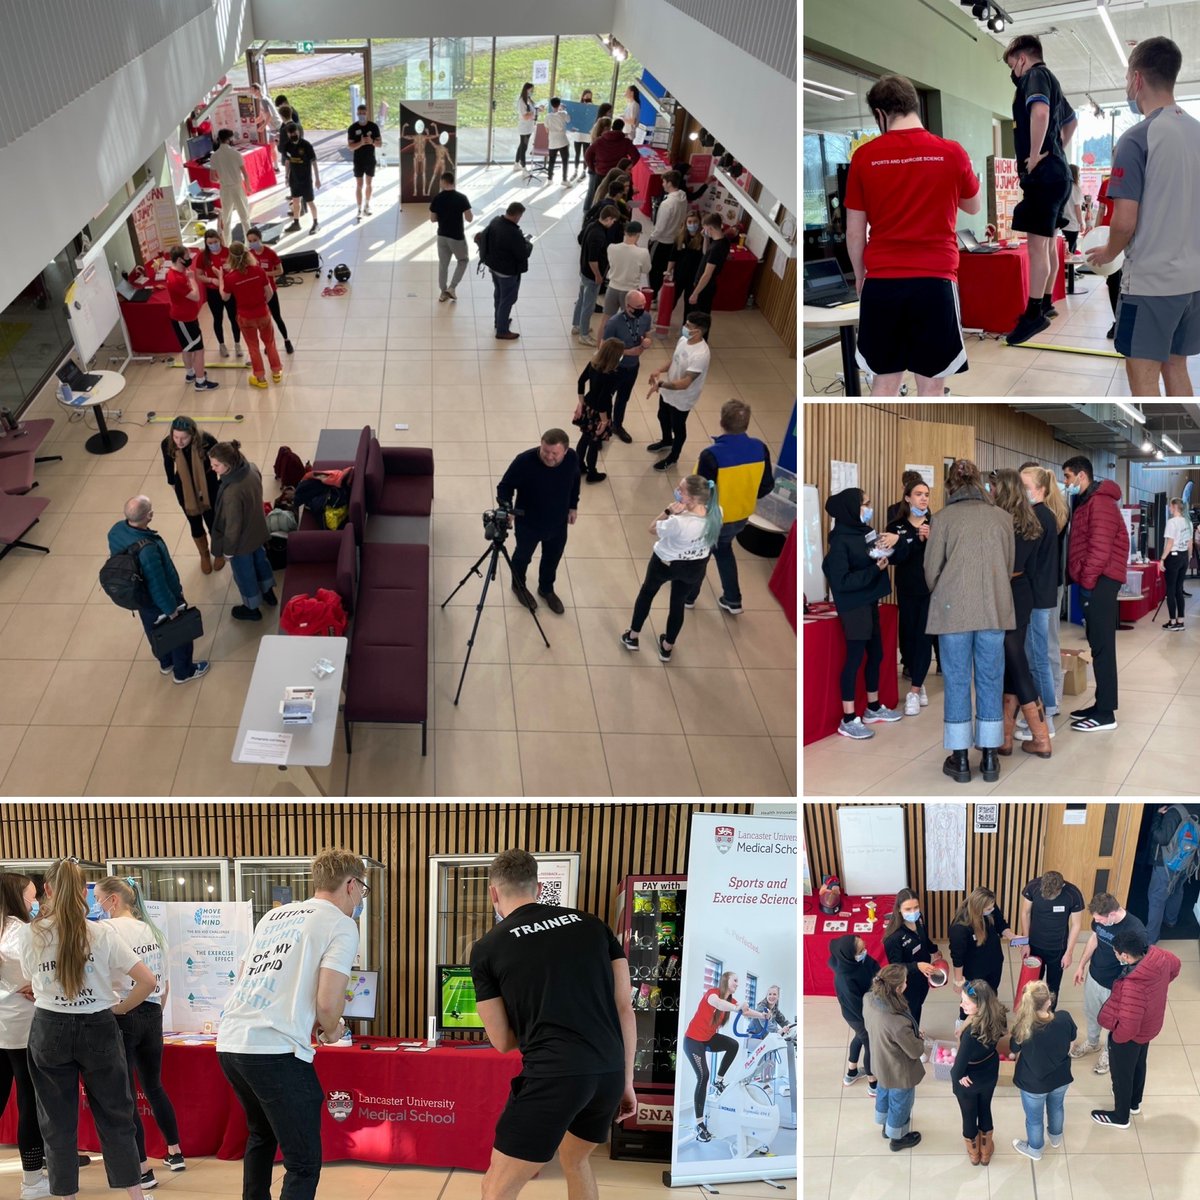 Our Year 3 @LU_SportsExSci Science Communication event is well underway in Health Innovation One. We're here until 2 pm so come and see us and chat, play, try, discuss and find out more! @LancasterUniFHM @LancasterMedSch @LancasterUni